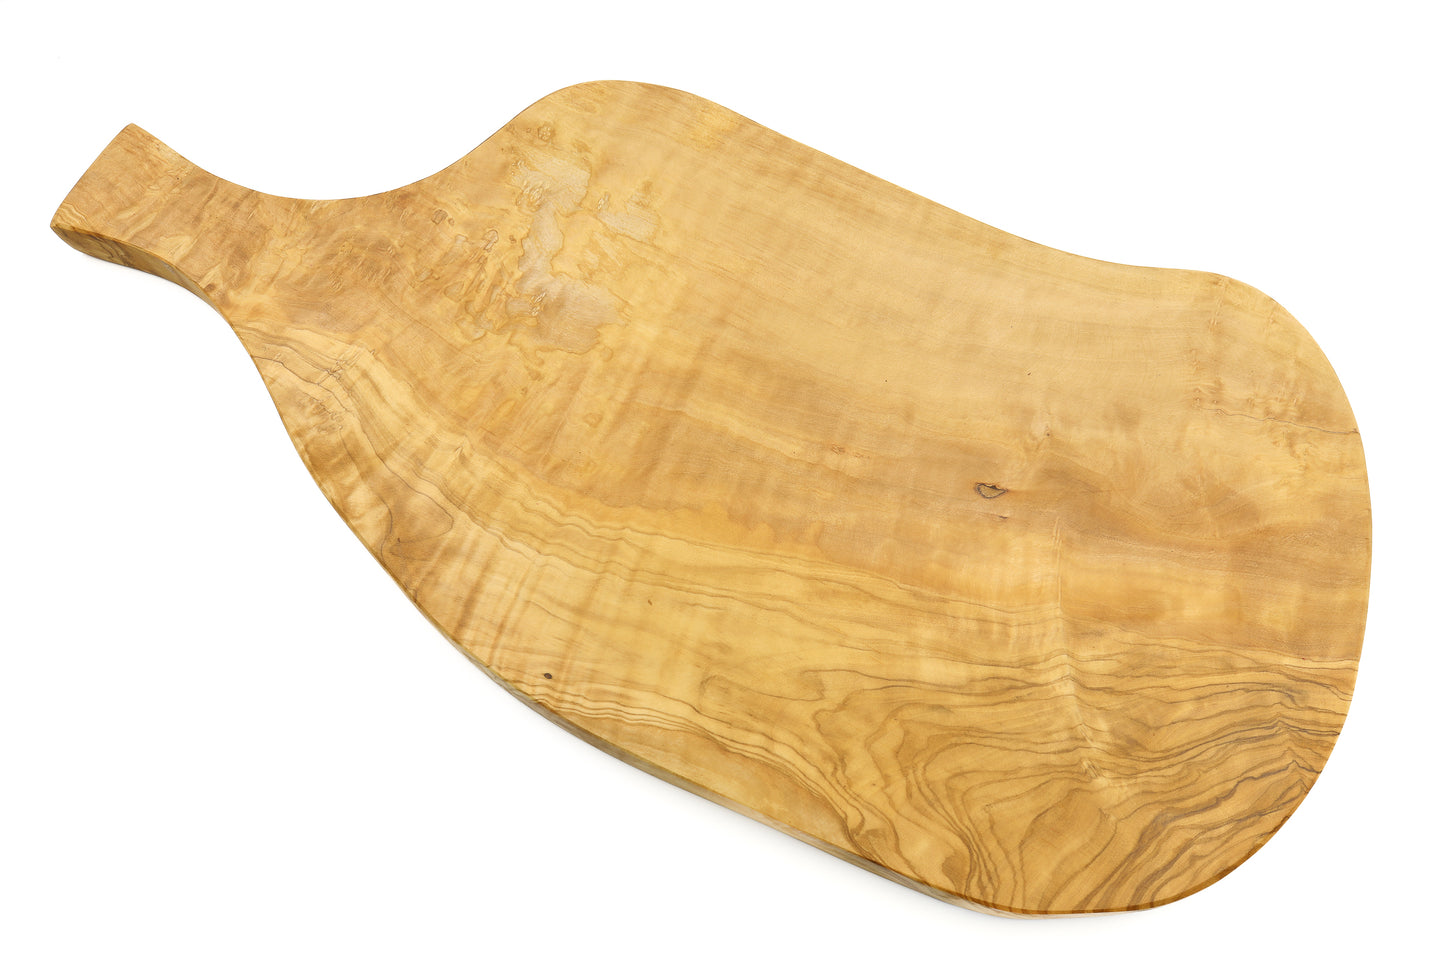 Handcrafted Olive Wood Cutting Board: Beef Thigh Shaped with Irregular Beauty